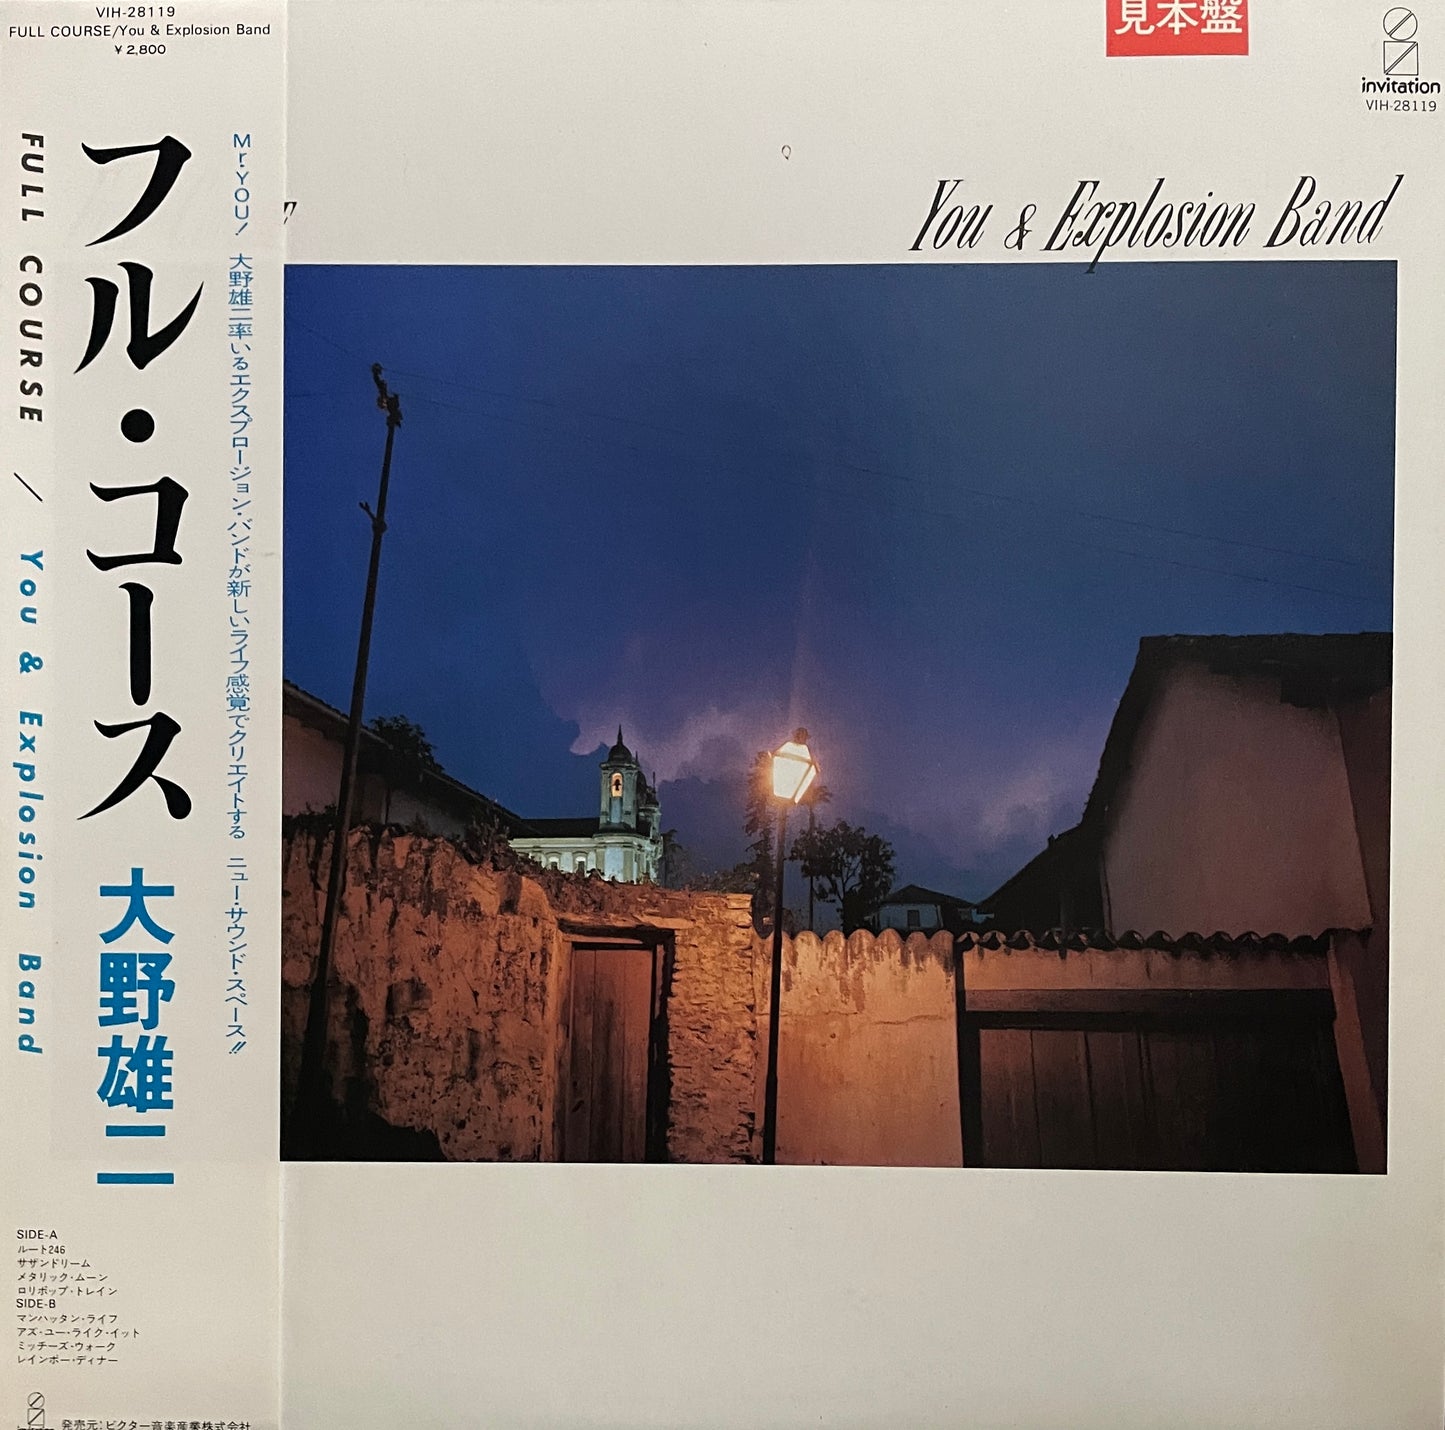 Yuji Onho (You & The Explosion Band) "Full Course" (1983)